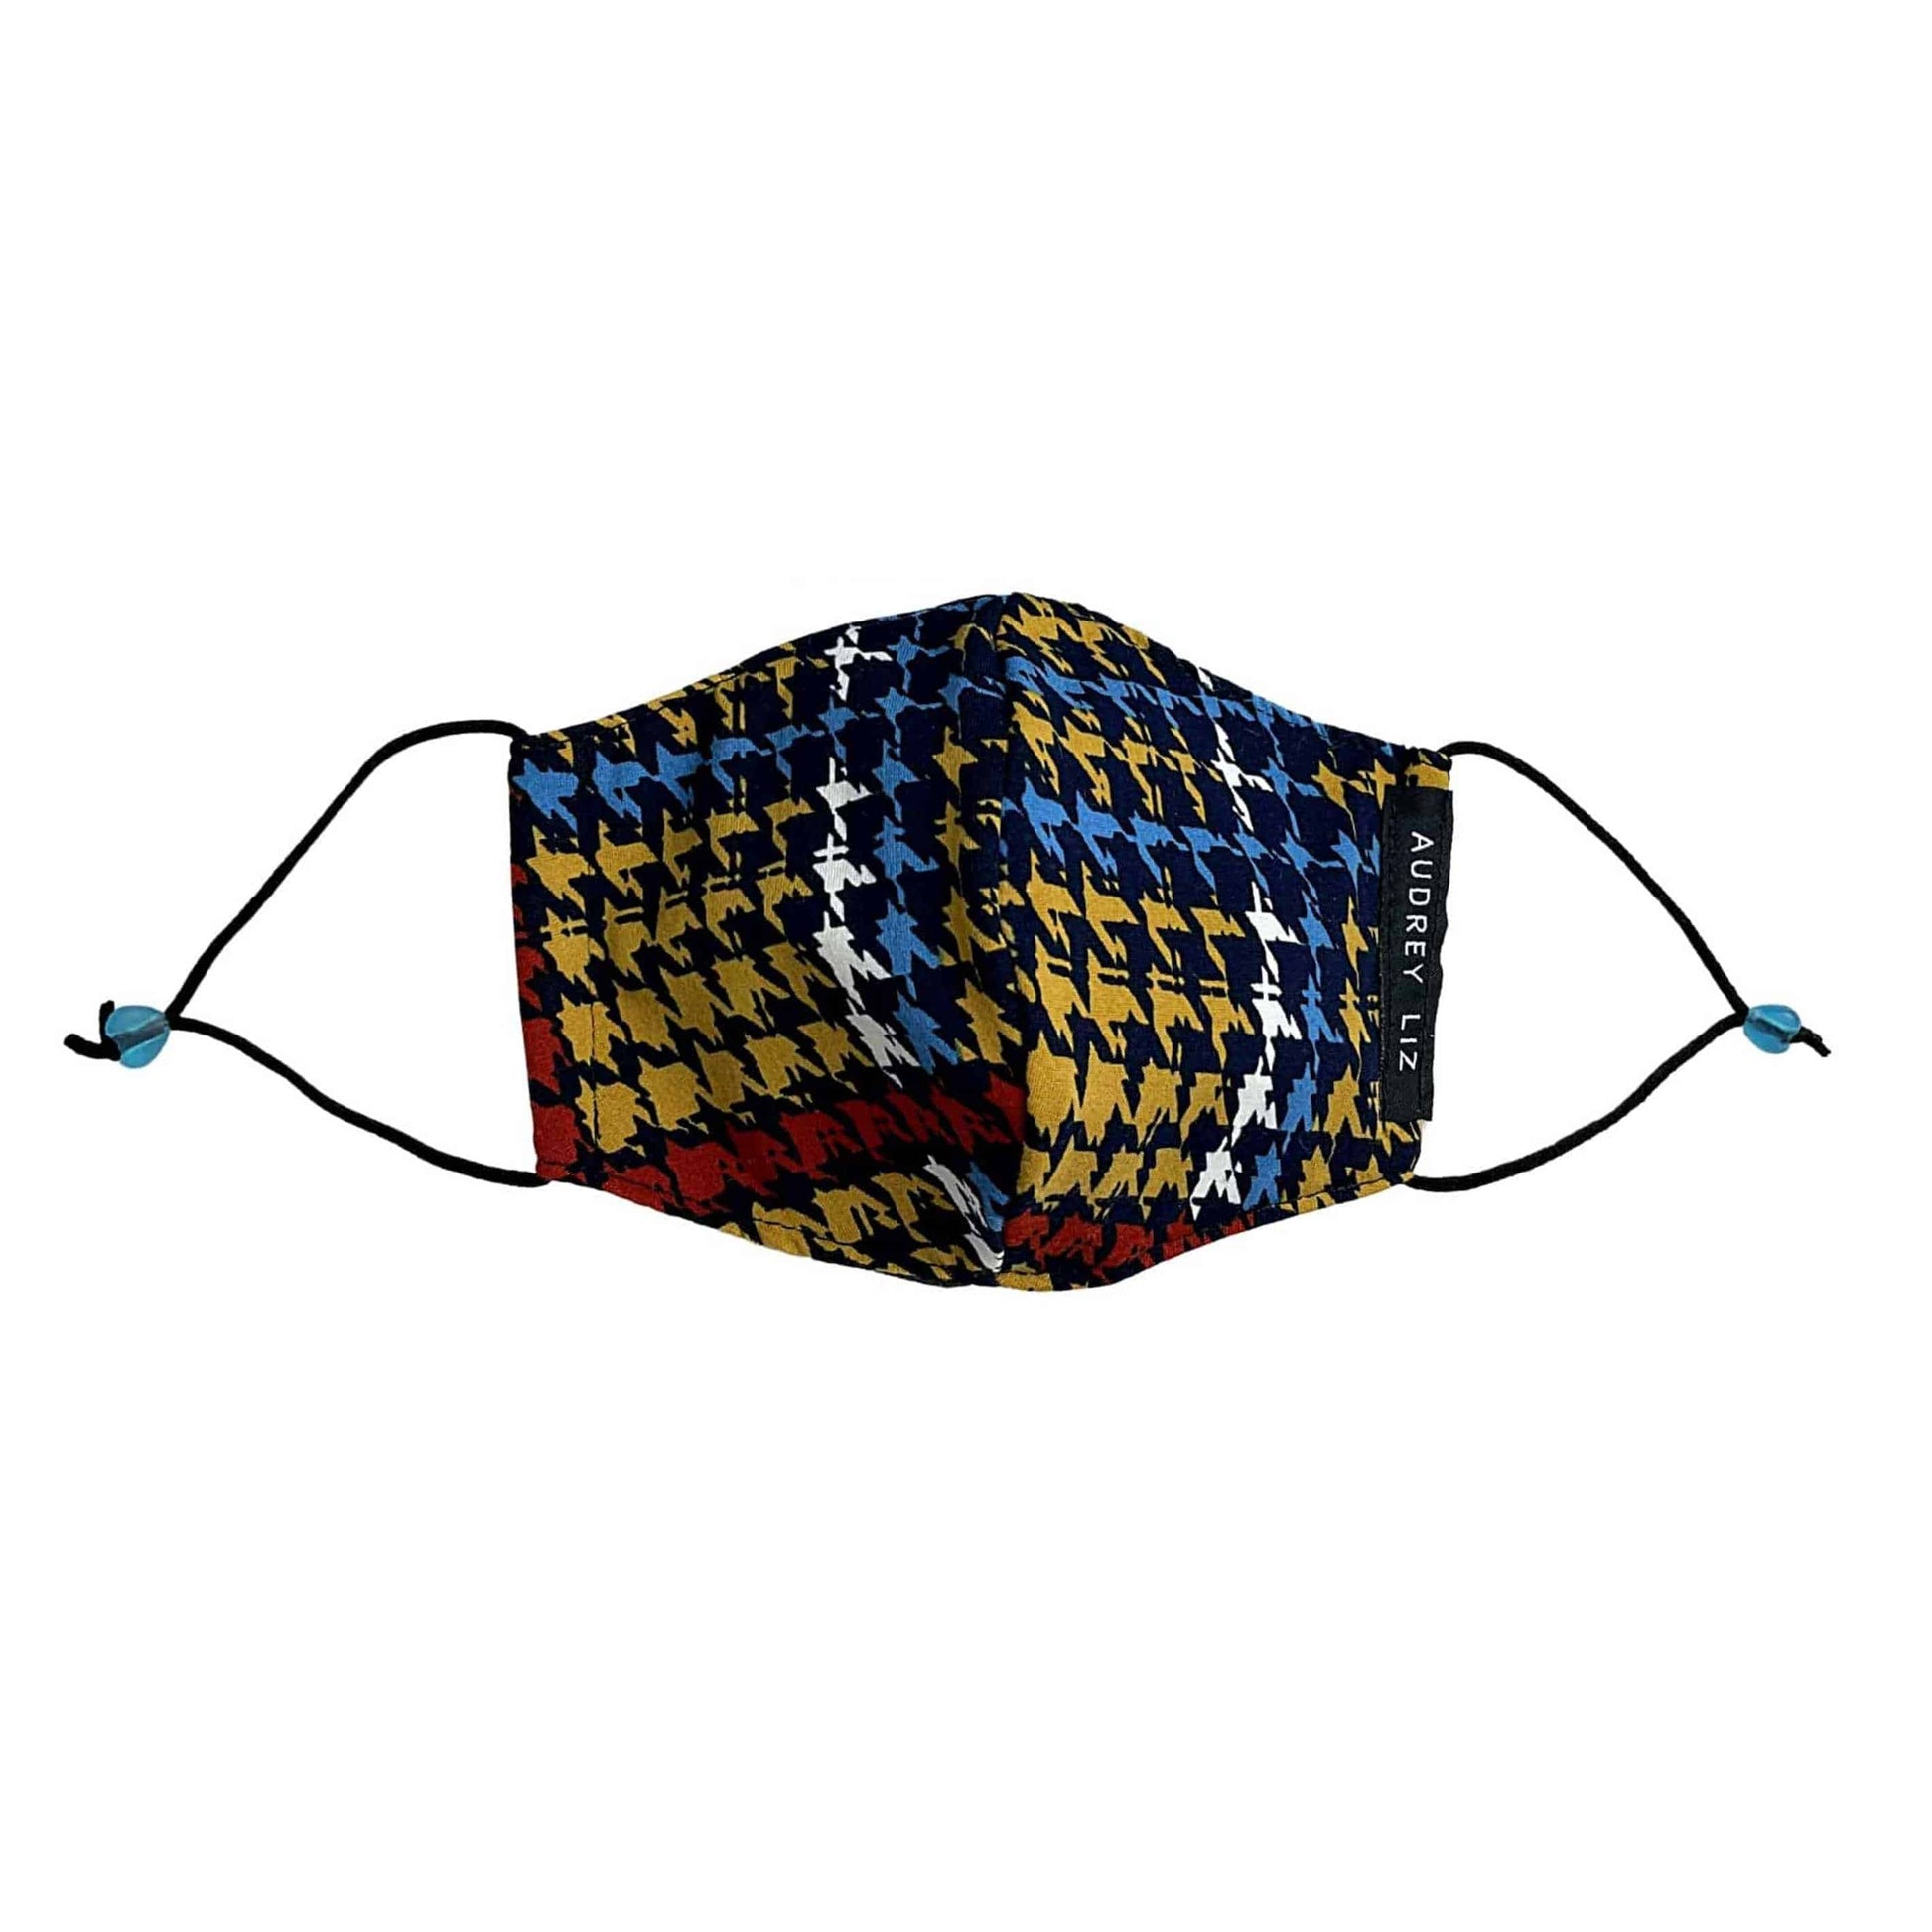 Two-layer face mask in a red, blue, and deep yellow houndstooth print.